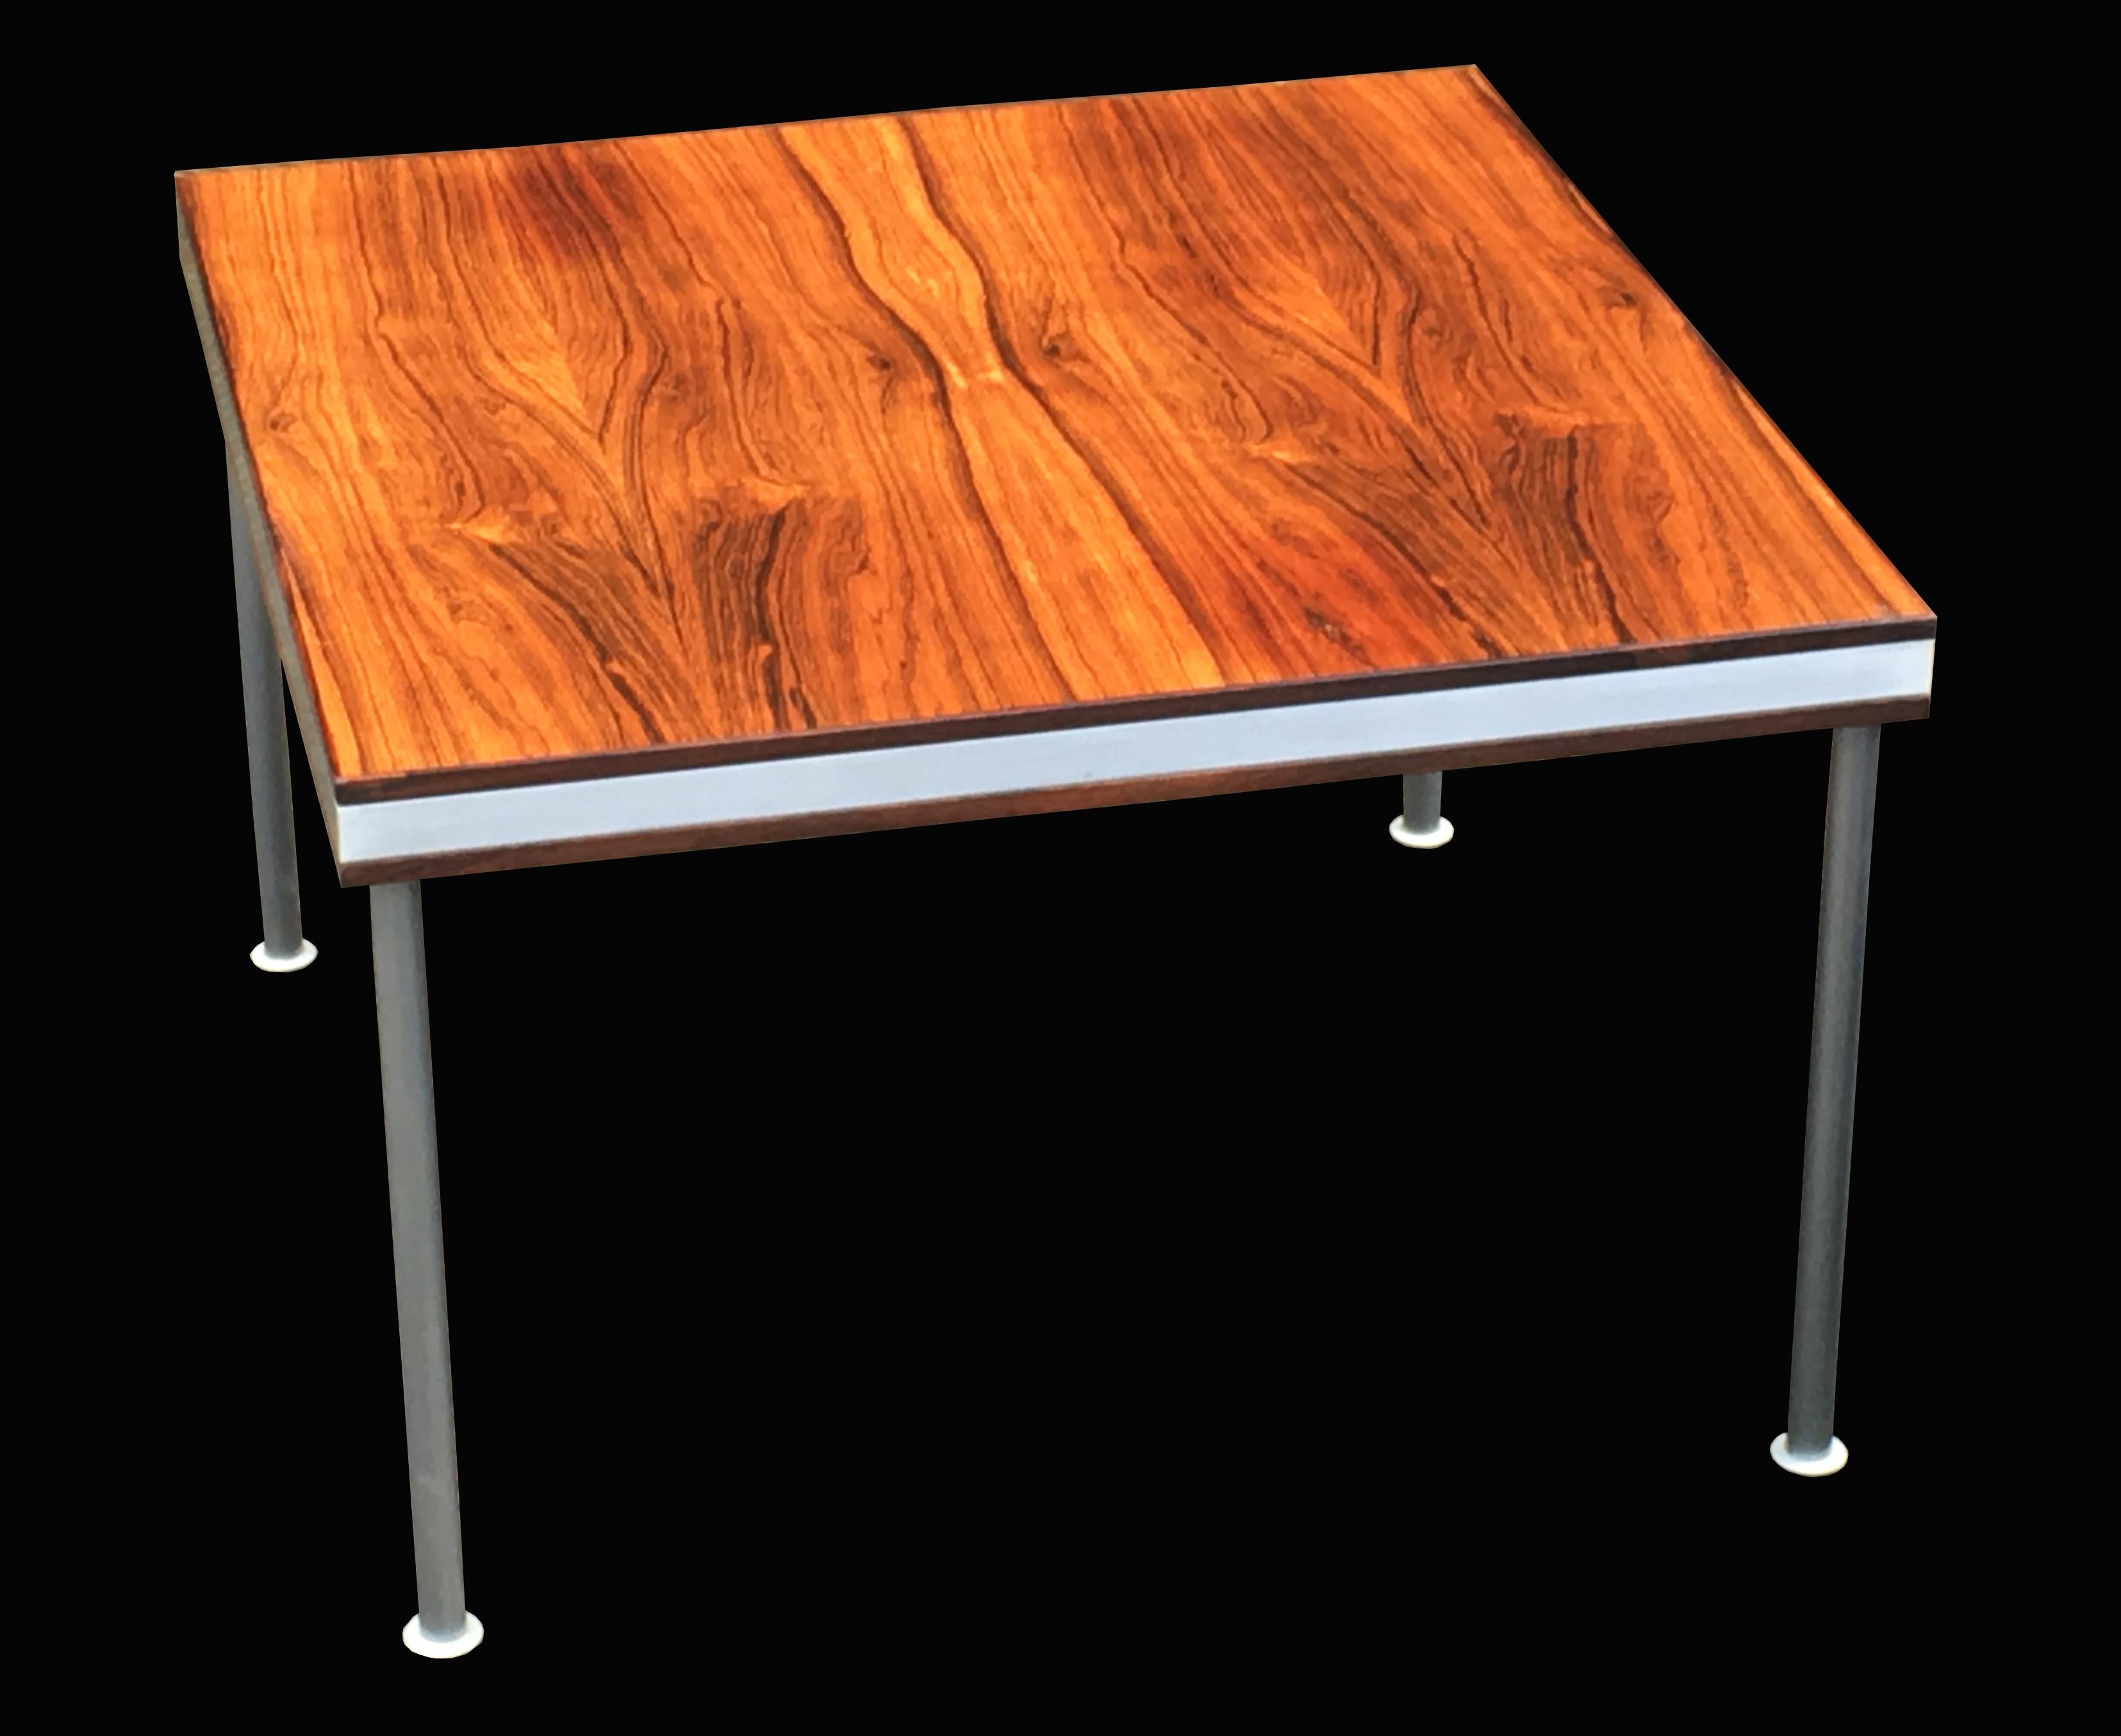 A very nice coffee table, sometimes by Poul Cadovious, the nicely figured Santos Rosewood ( a species which does not require CITES certification) with aluminium edges and legs. A very nice example in great condition and with an especially nice color